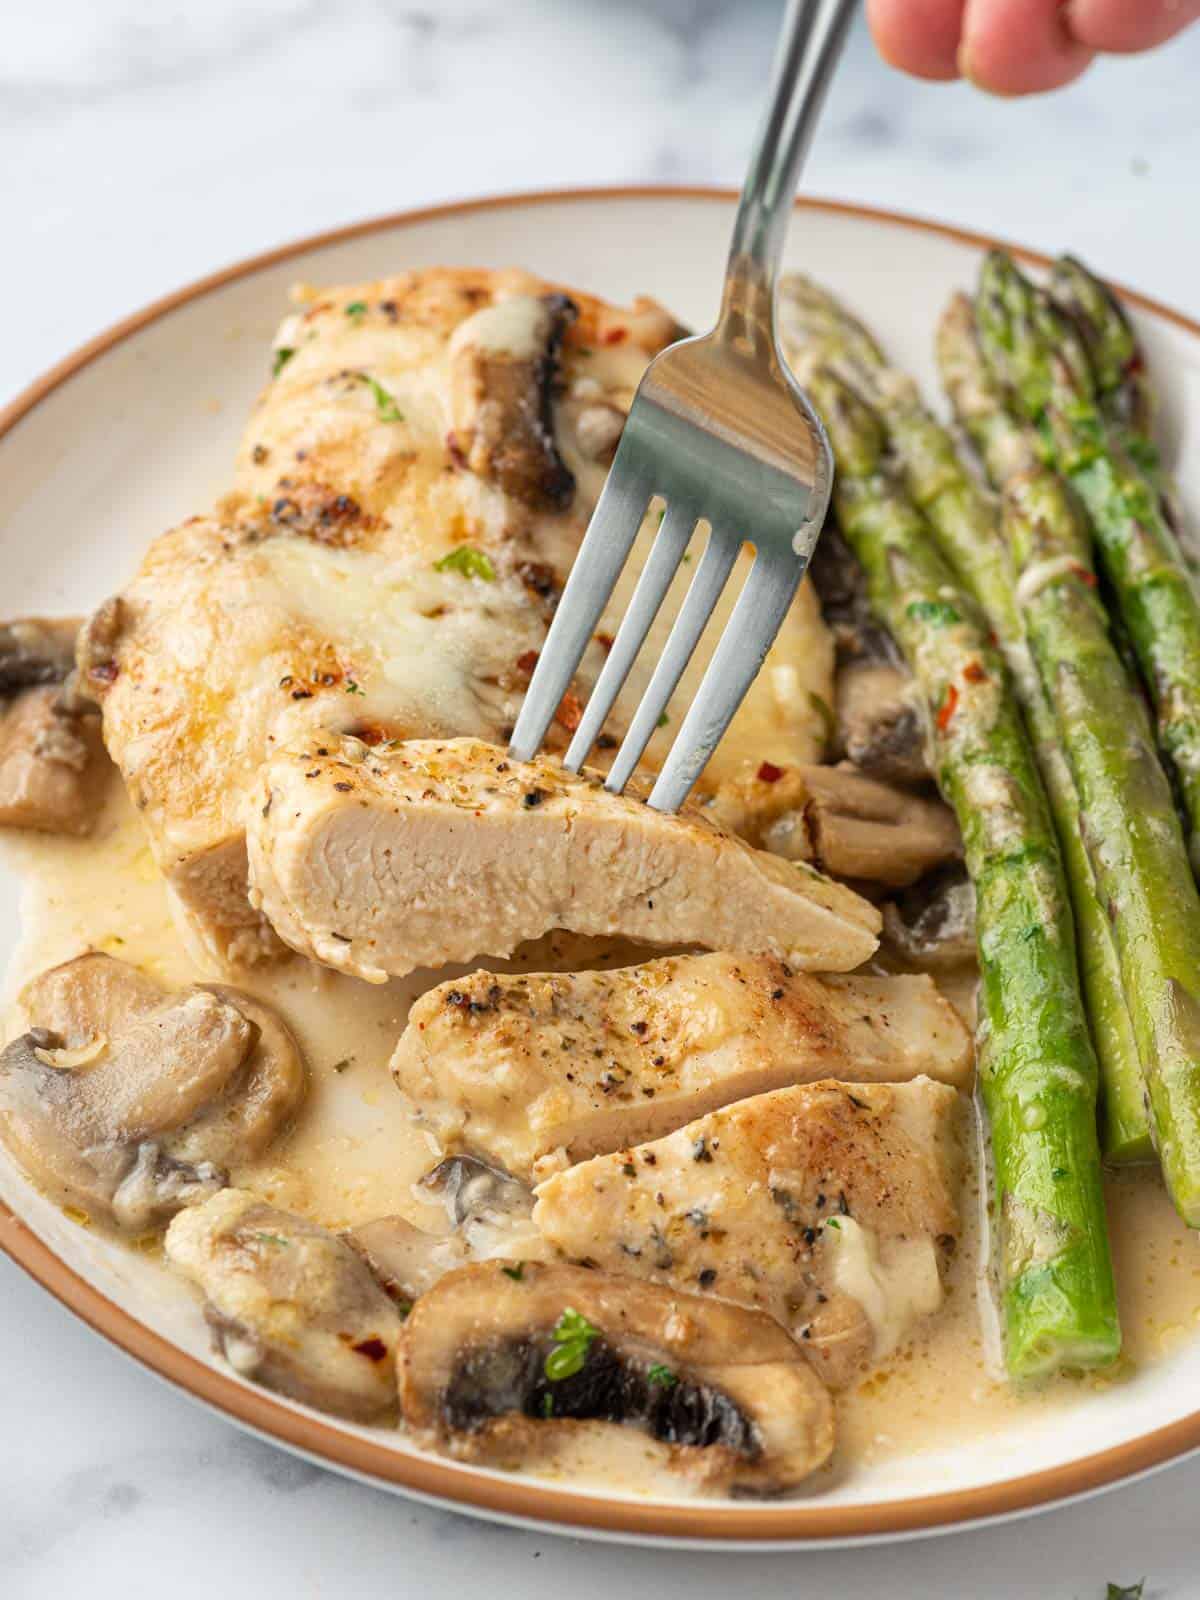 A plate with chicken madeira, mushrooms, and asparagus.